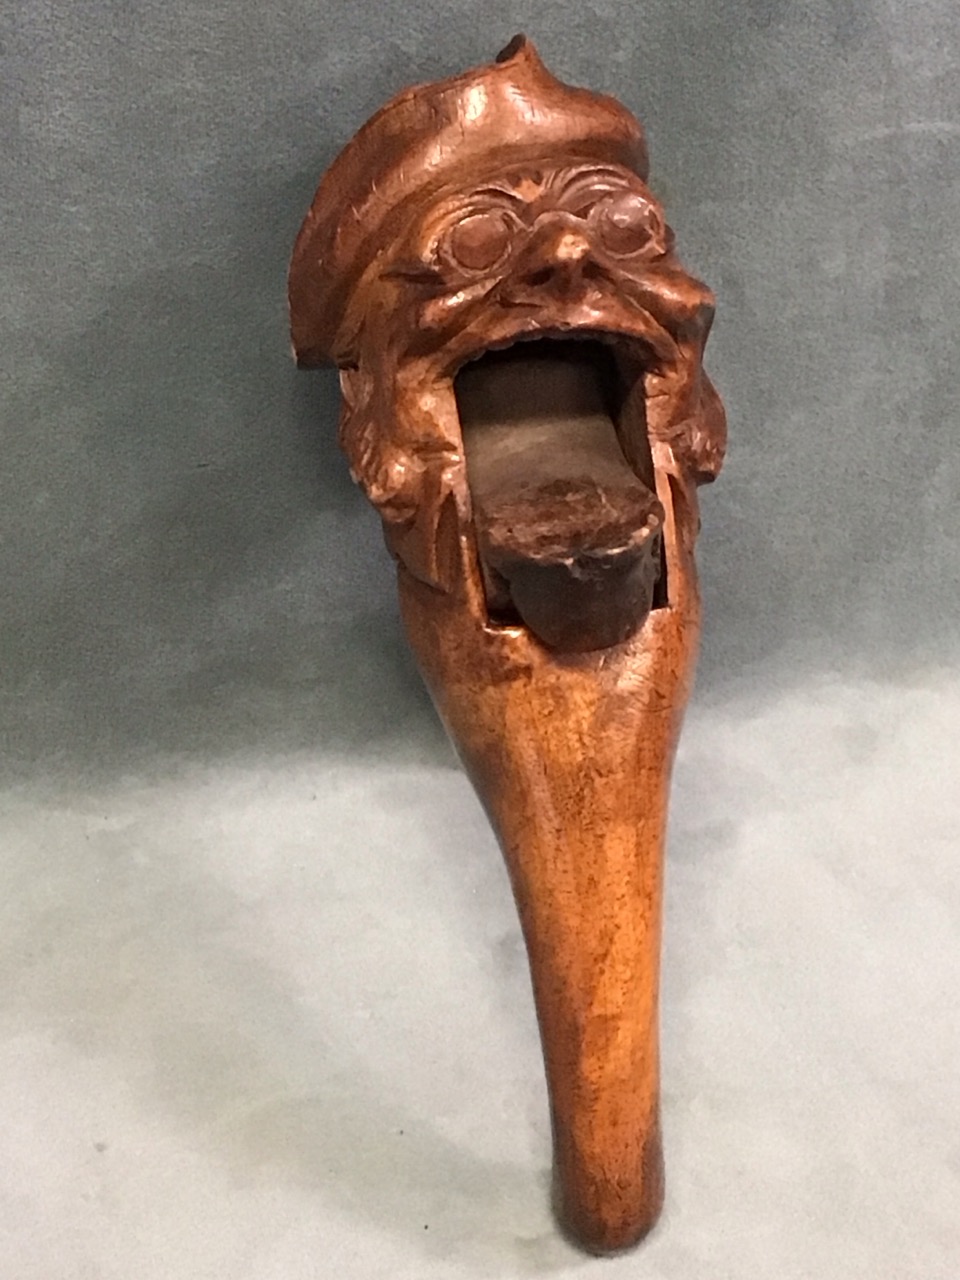 A C19th Swiss carved walnut nutcracker in the form of a comical old man wearing a tricorn hat and - Image 2 of 3